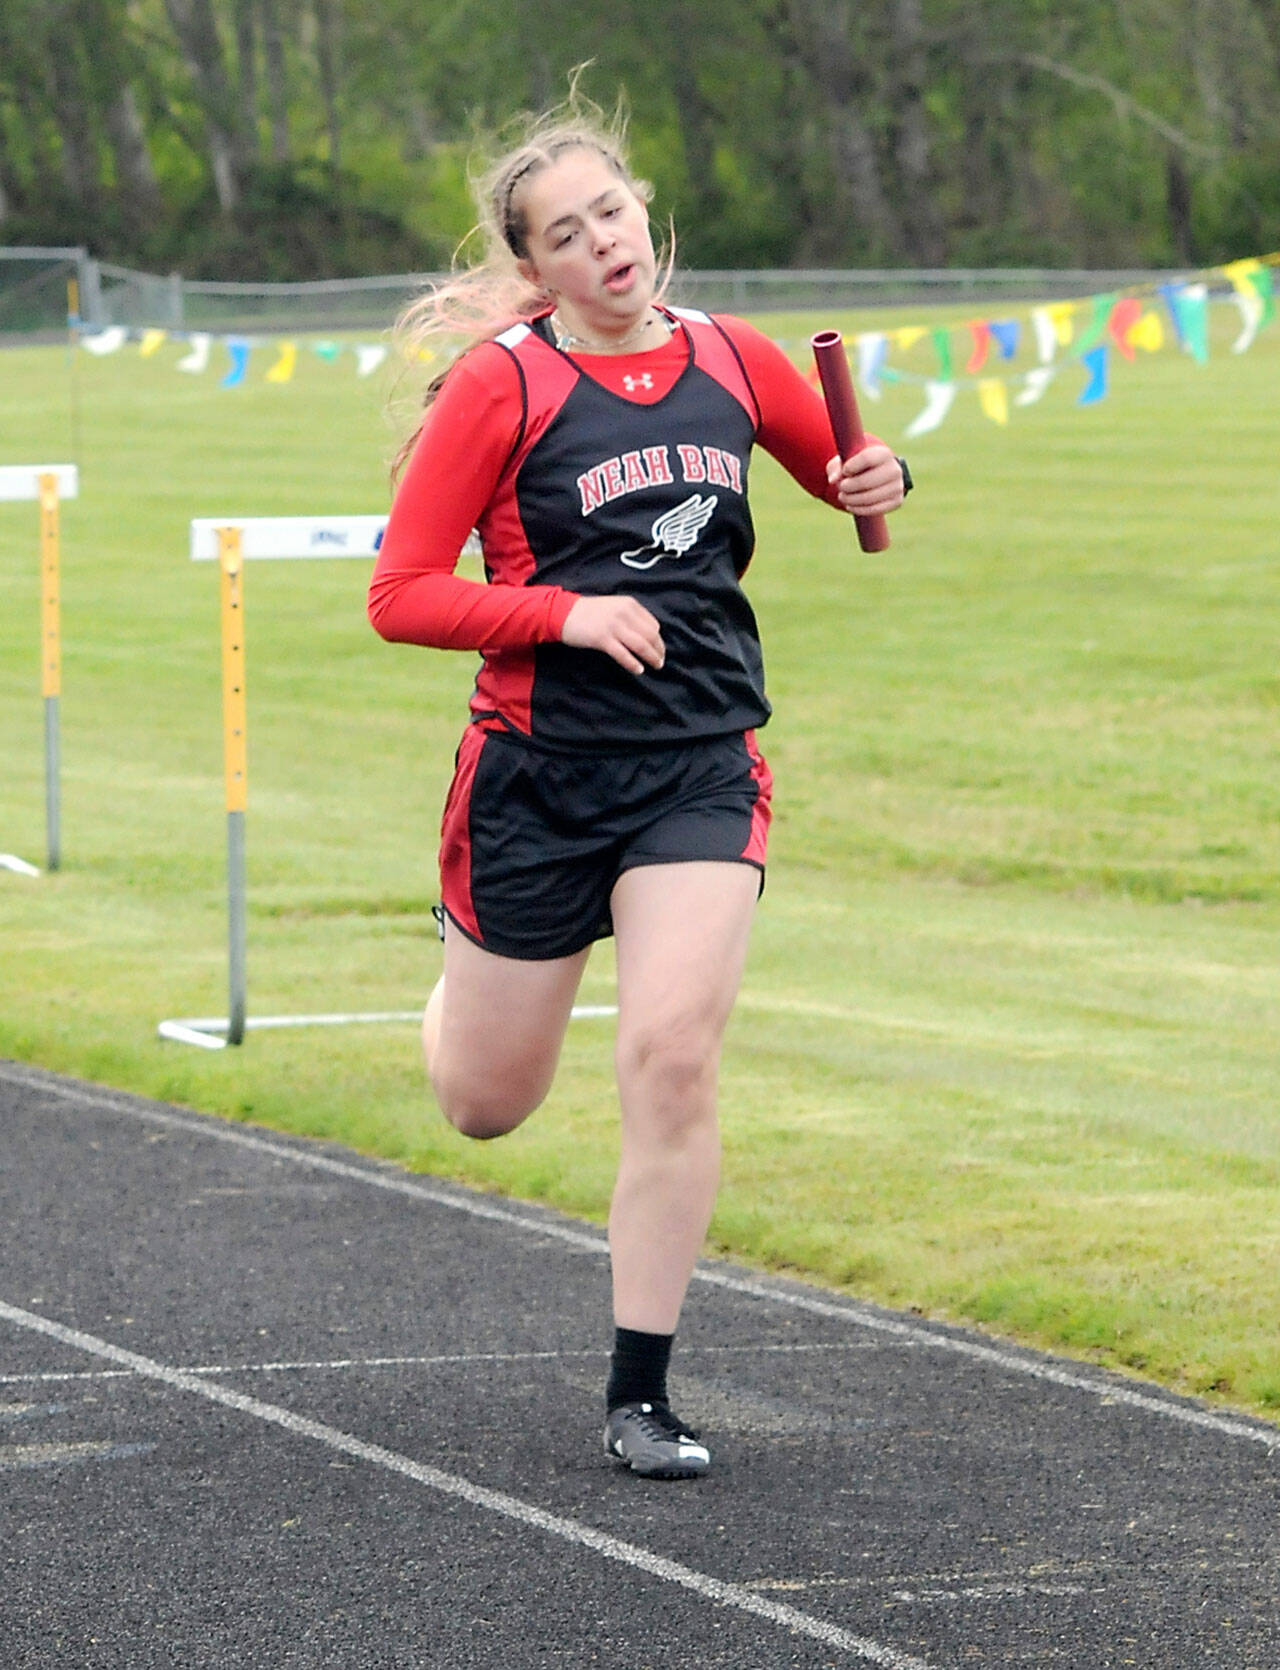 Keith Thorpe/Peninsula Daily News
Anchor Wiinuk Martin of Neah Bay crosses the finish line for her team to win the girls 4x200 meter relay on Friday at Crescent School in Joyce.